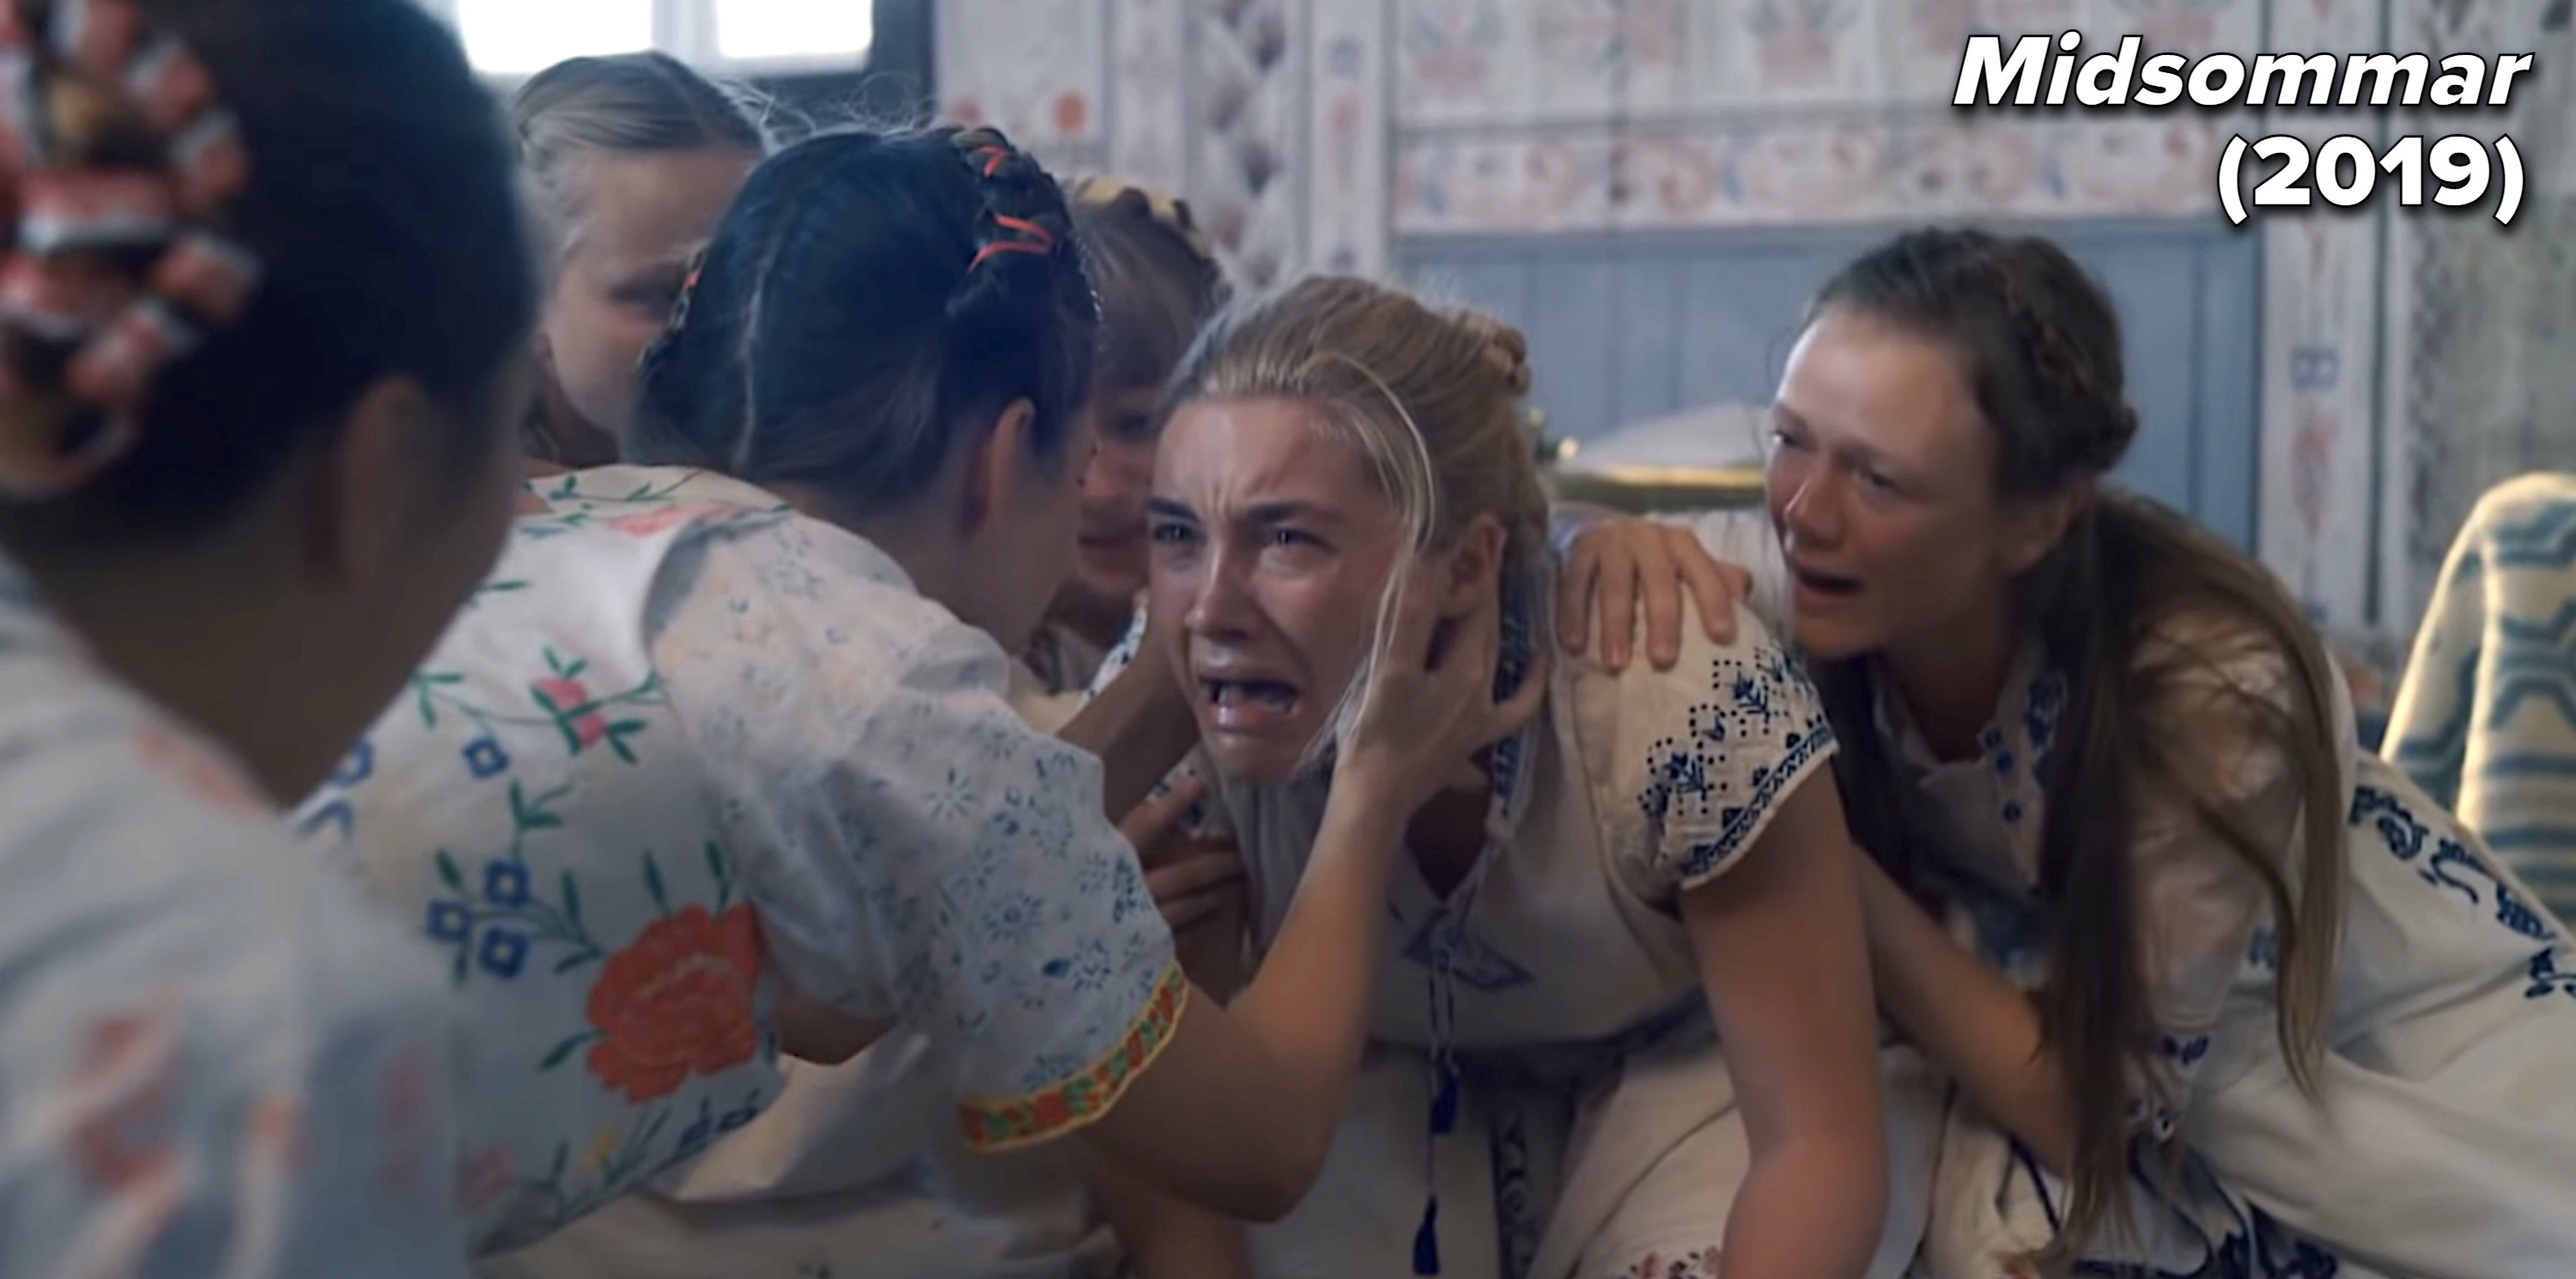 scene from midsommar of a woman crying and a group of woman surrounding her